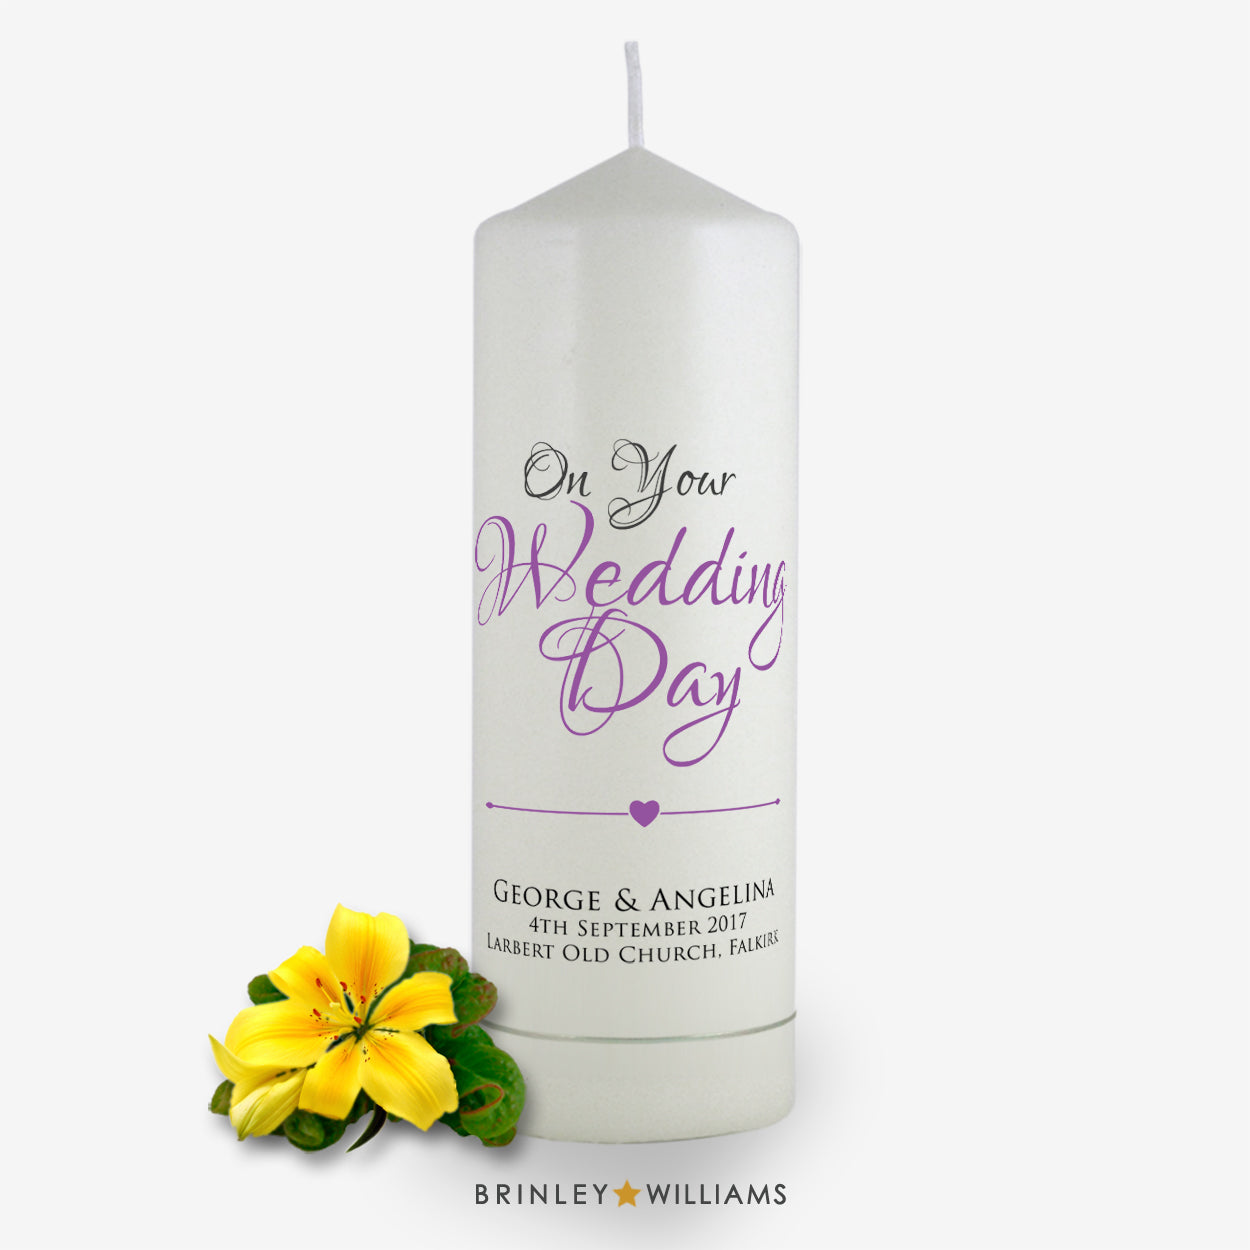 On your Wedding Day Personalised  Candle - Lavender